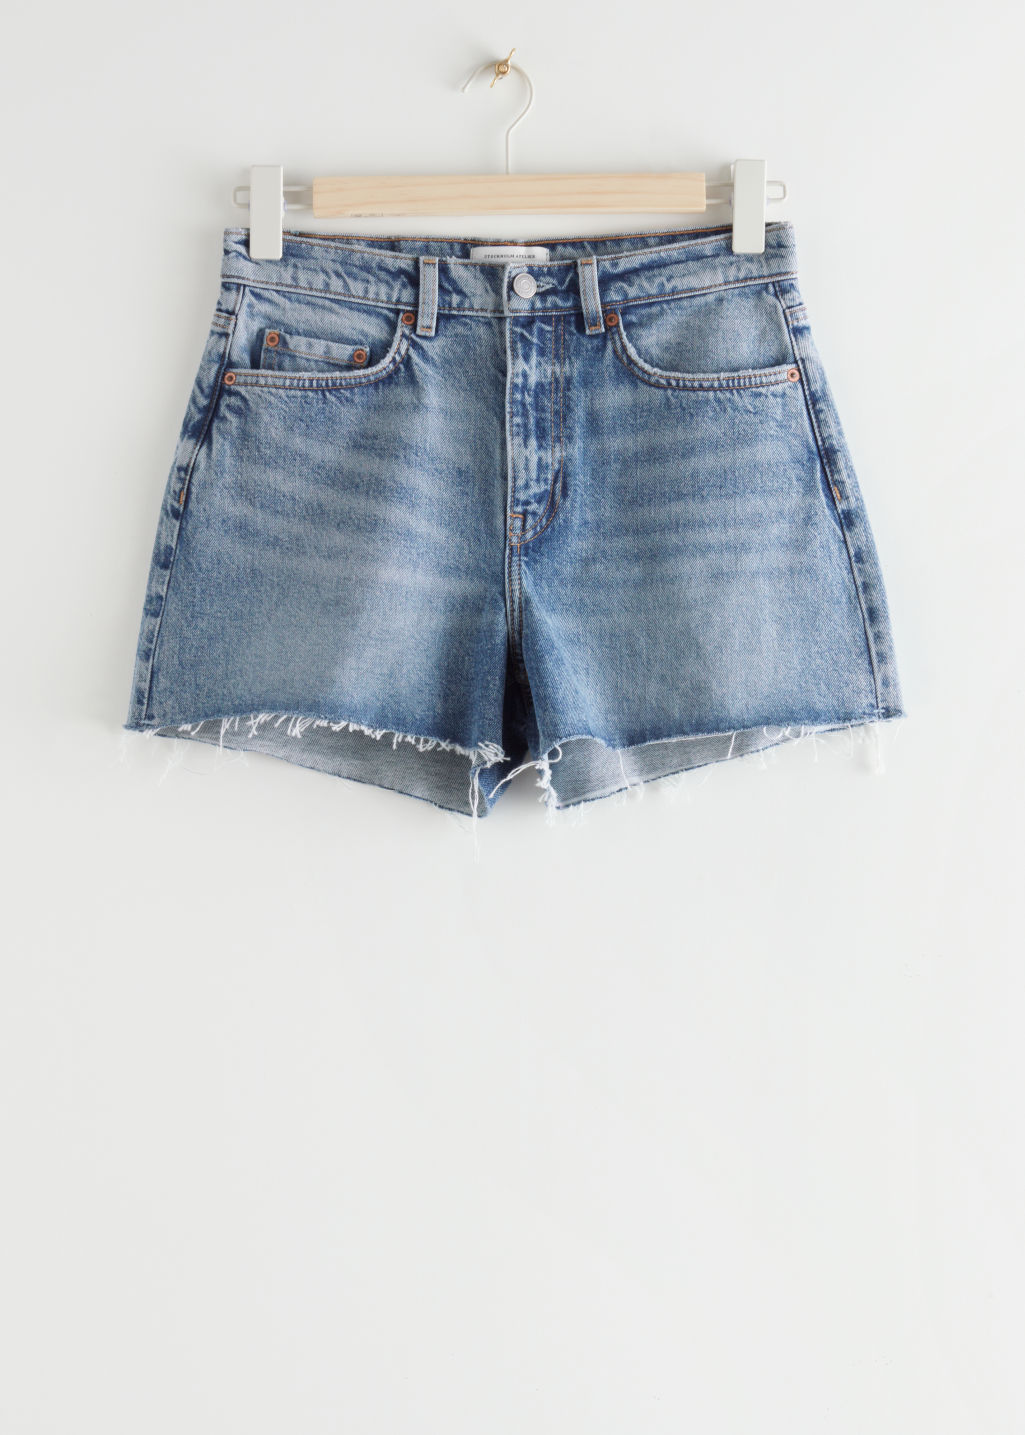 High Waist Cut Off Jeans Shorts - Grey - Shorts - & Other Stories